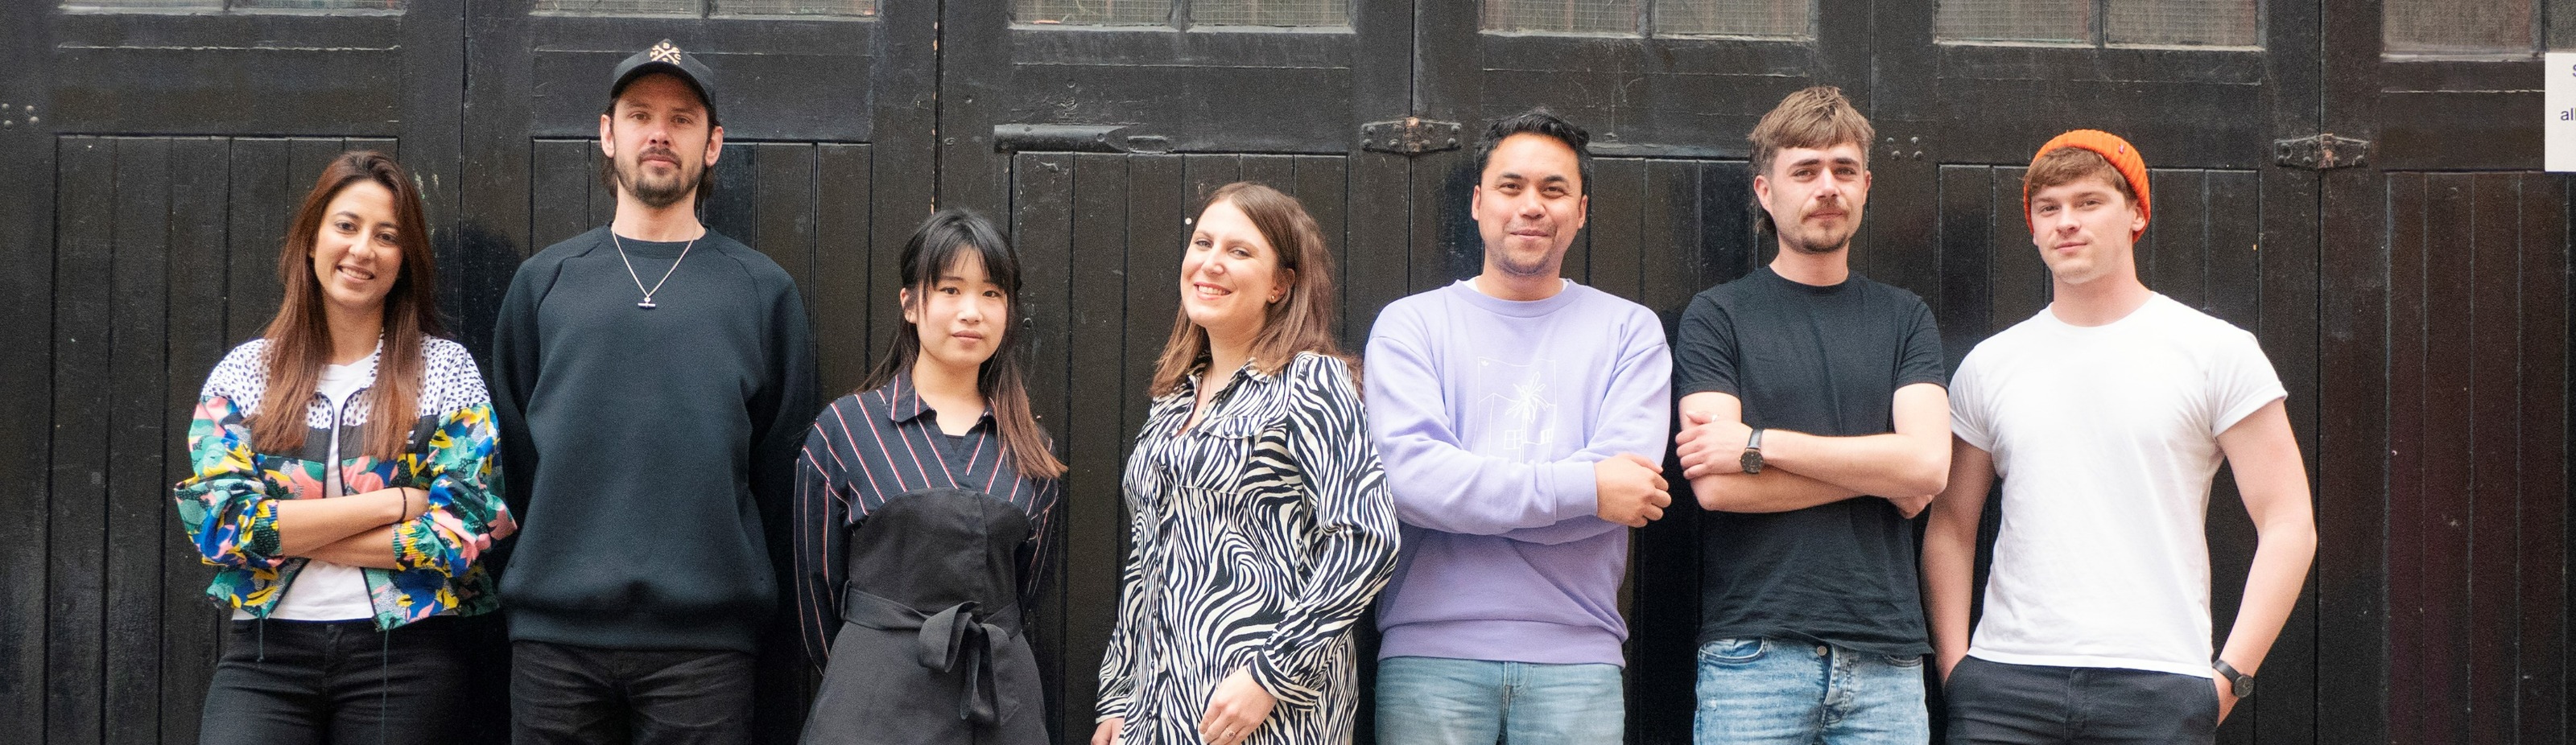 elvis makes raft of new hires and boosts creative firepower following period of significant growth